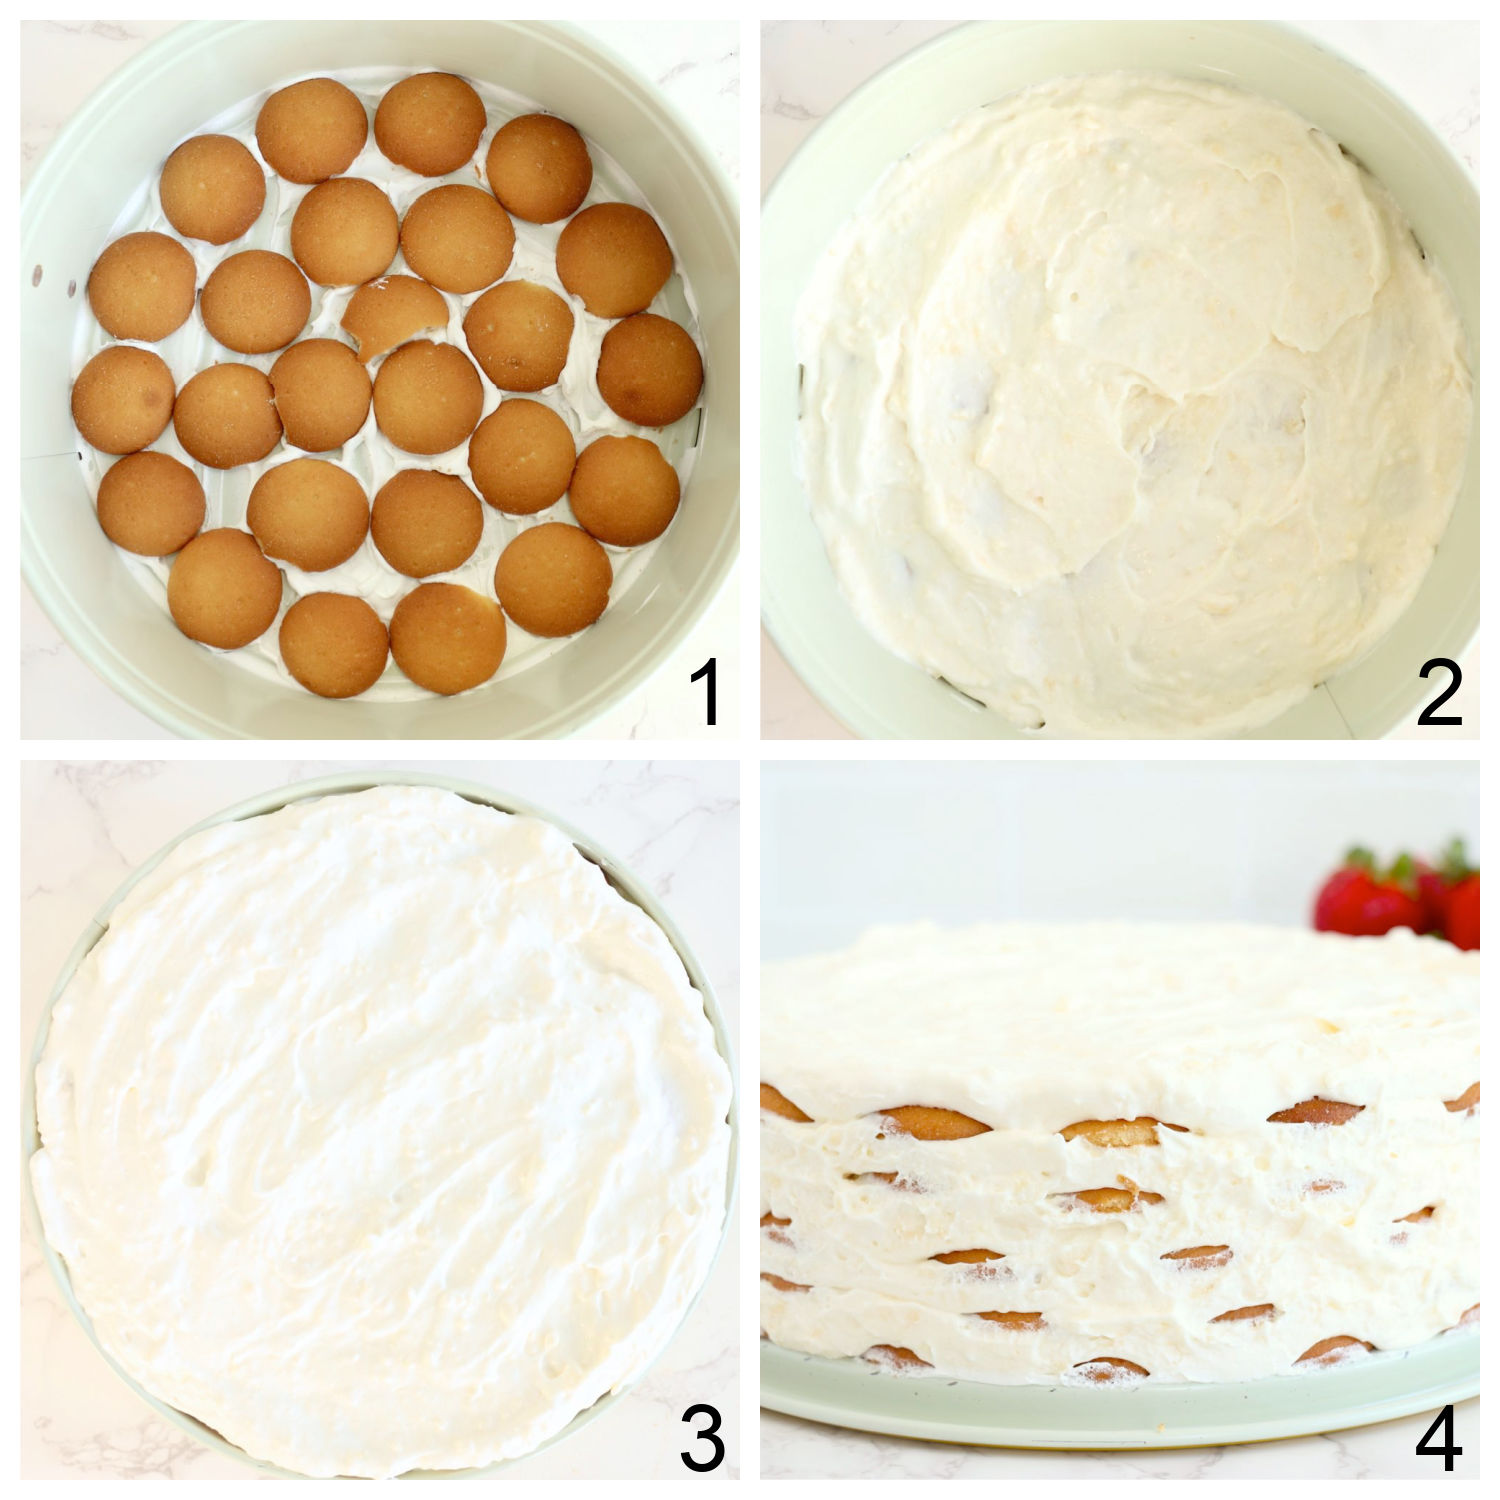 steps for making cake with Nilla wafers